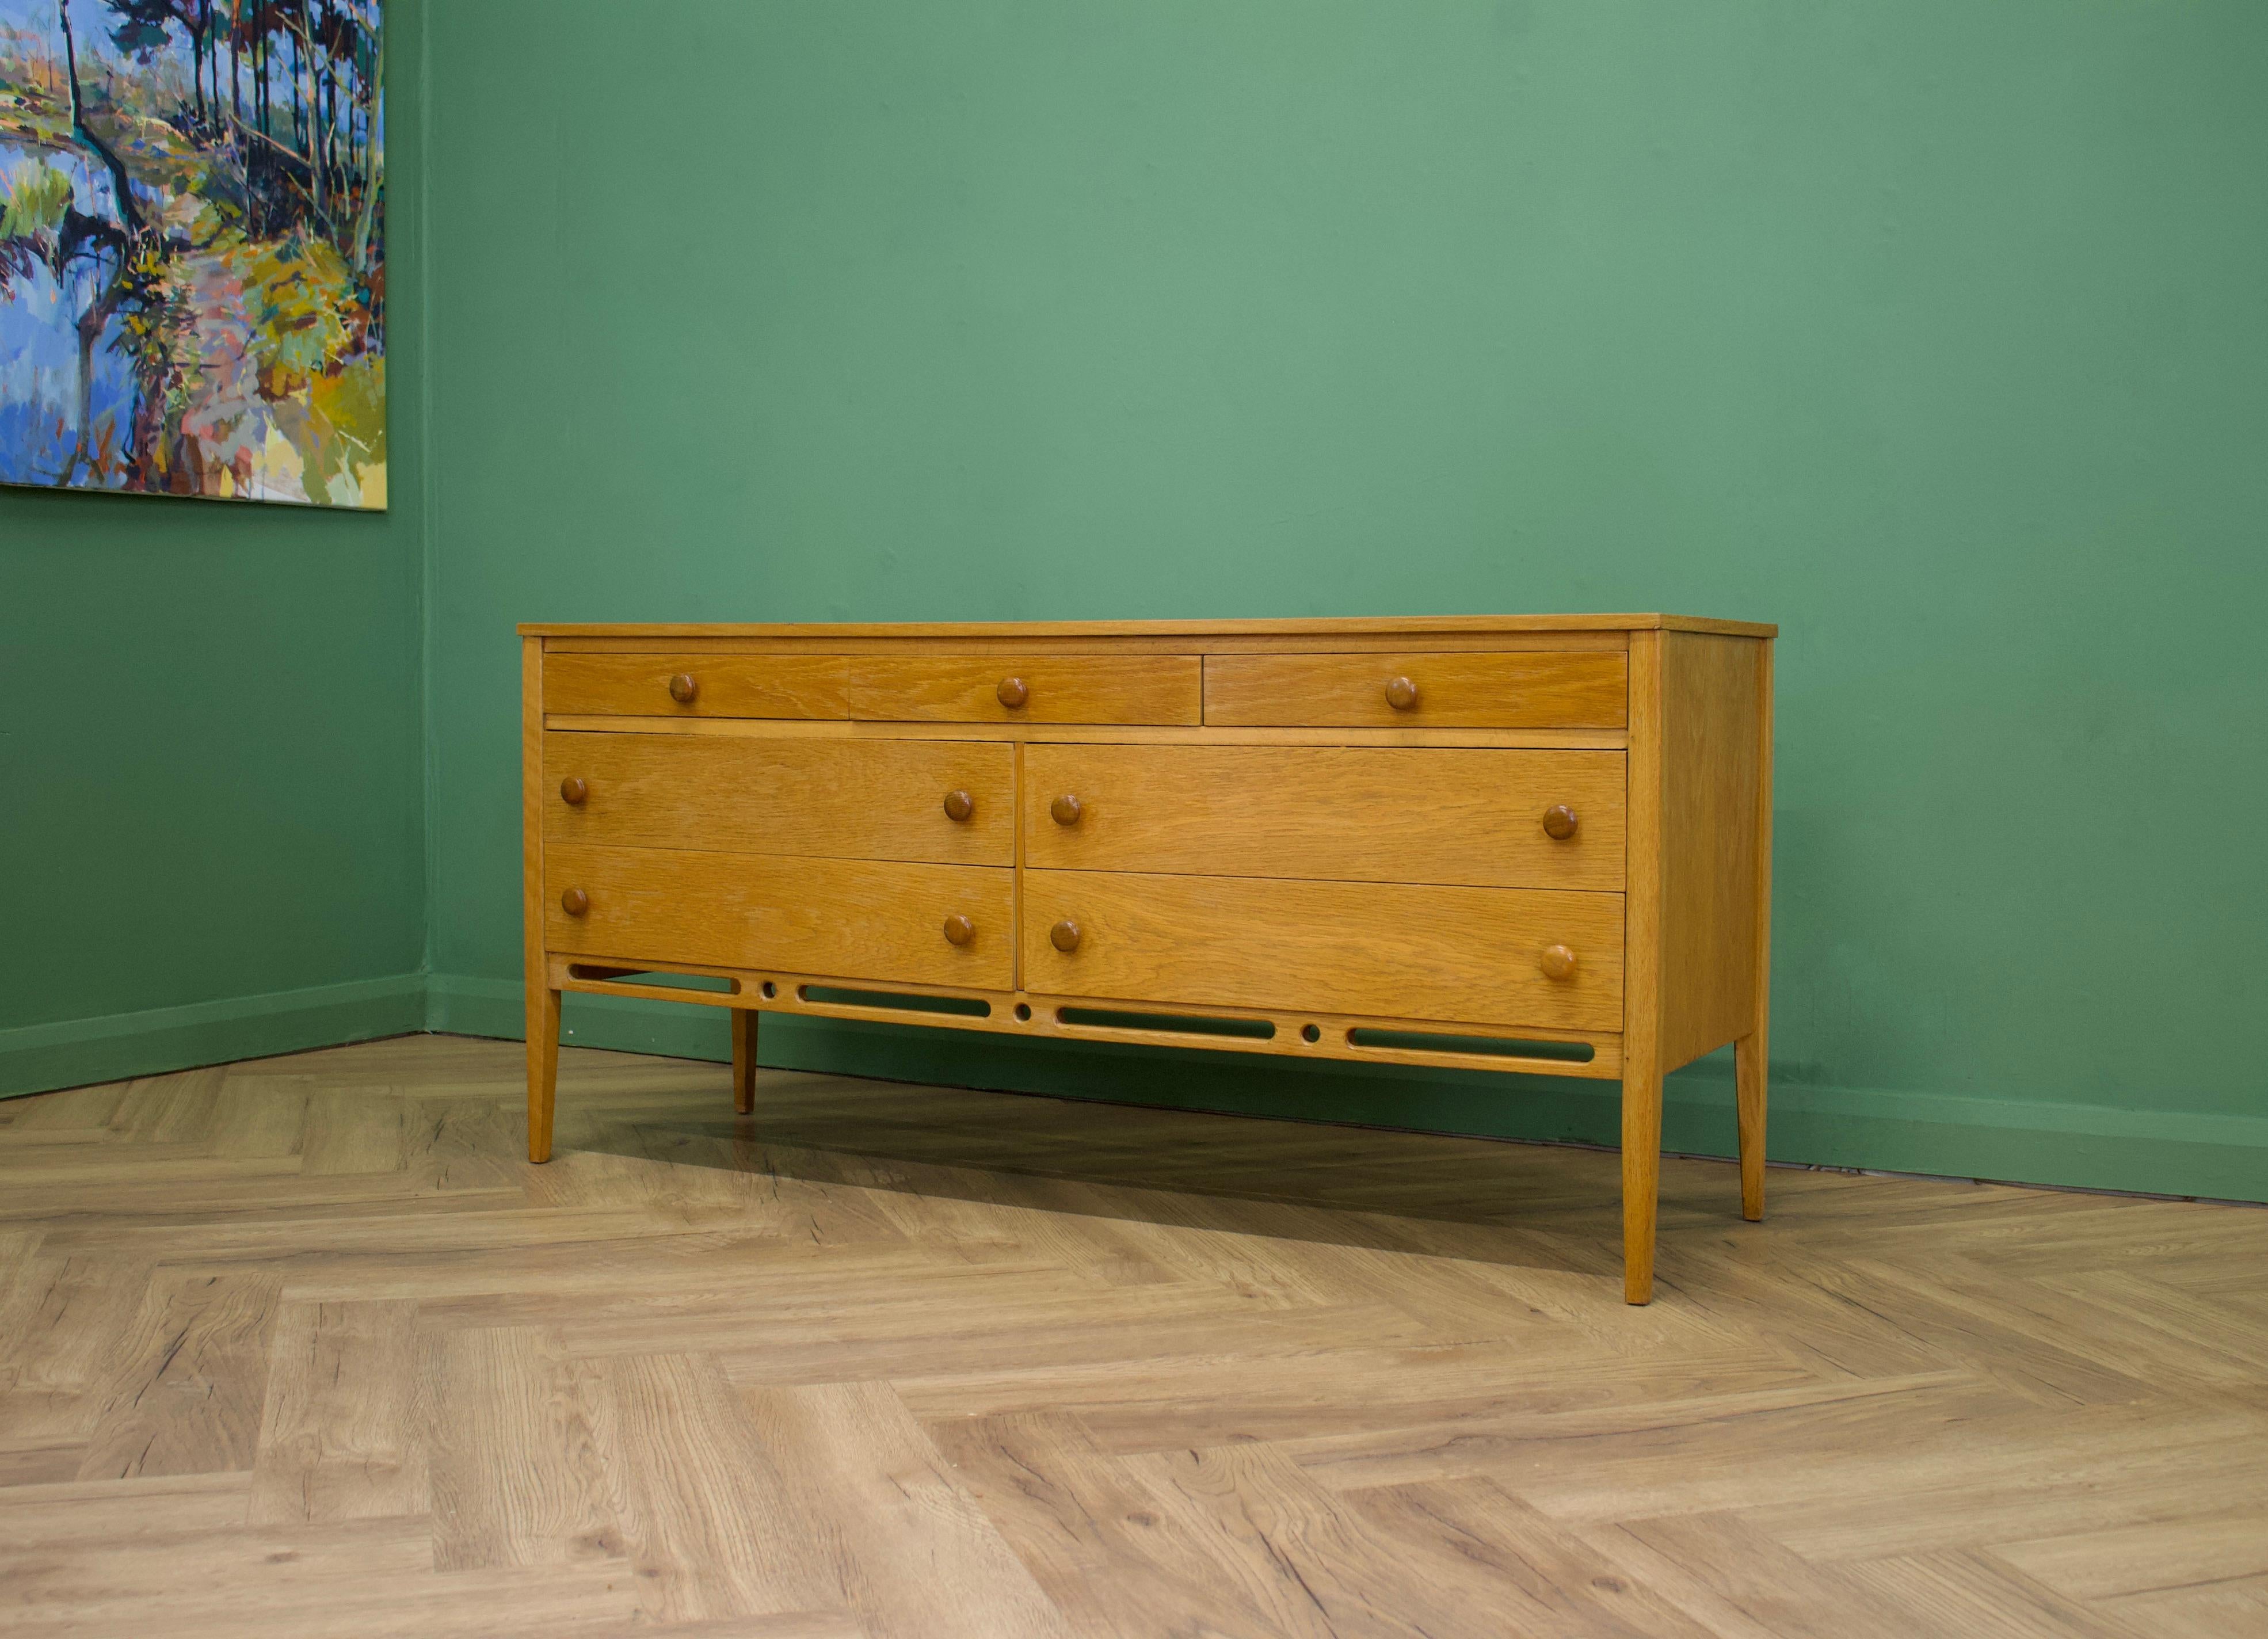 British Midcentury Oak Dresser or Compact Sideboard by John Herbert for Younger, 1960s